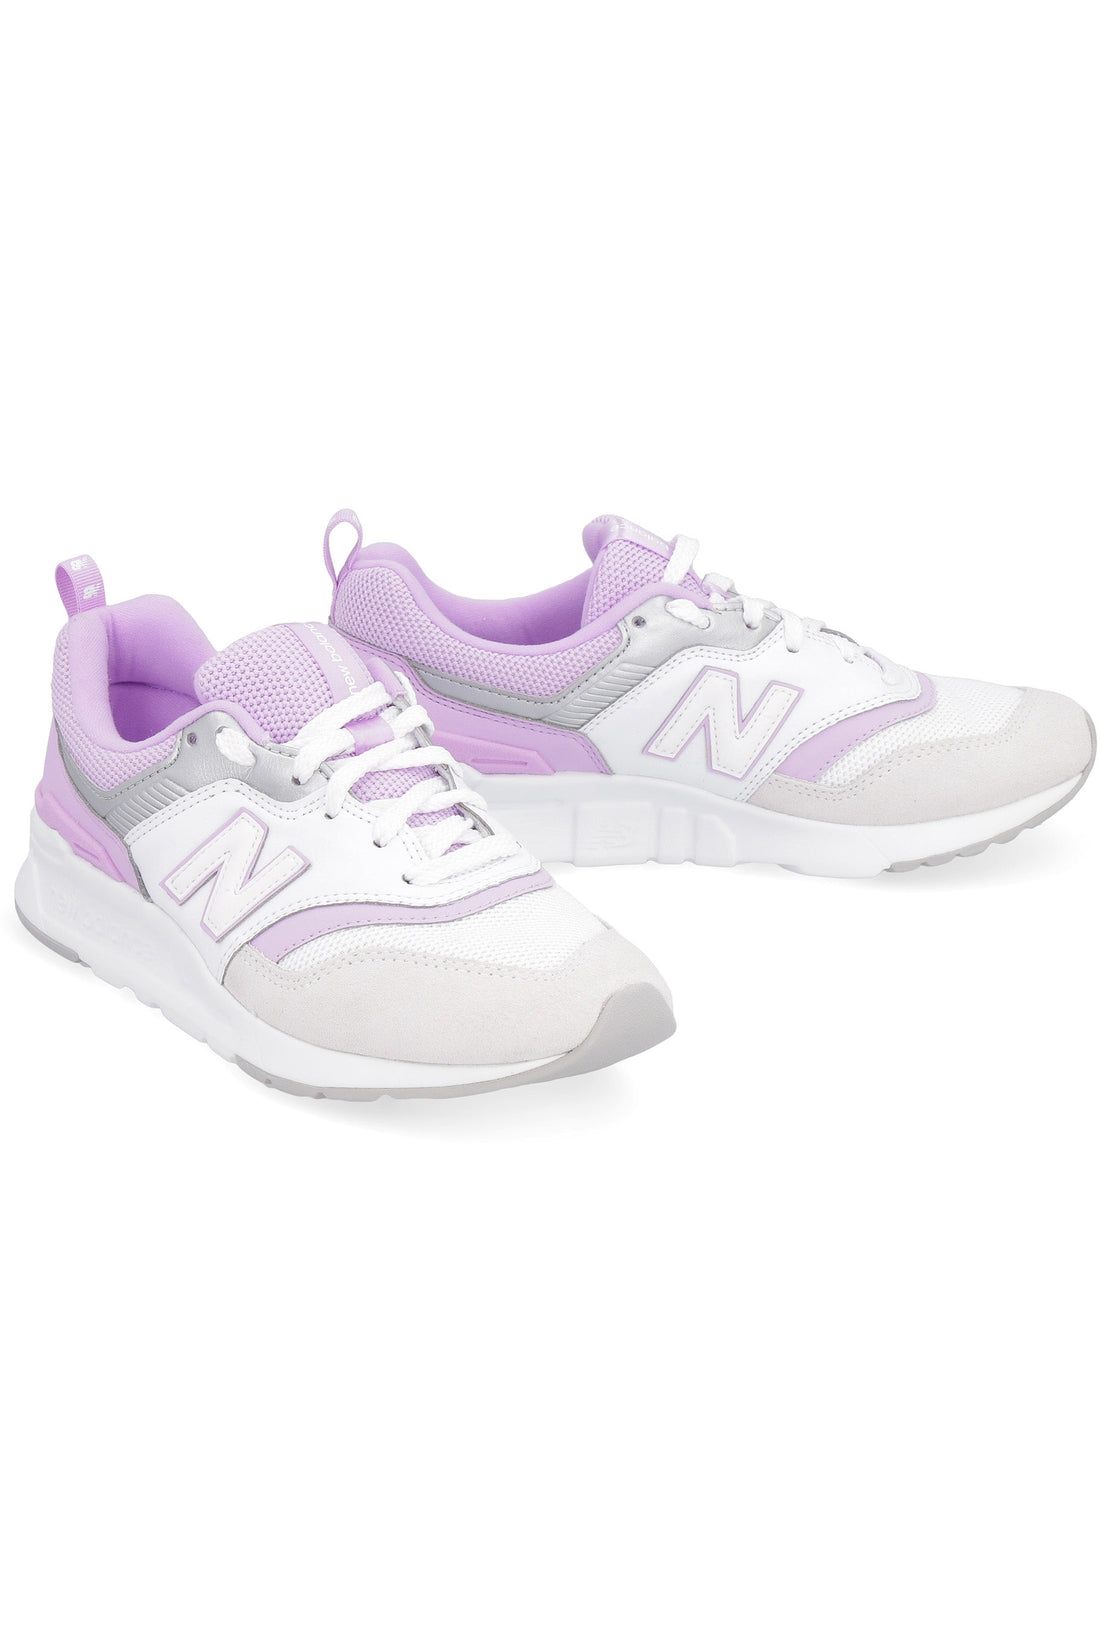 New Balance-OUTLET-SALE-997 suede and mesh sneakers-ARCHIVIST